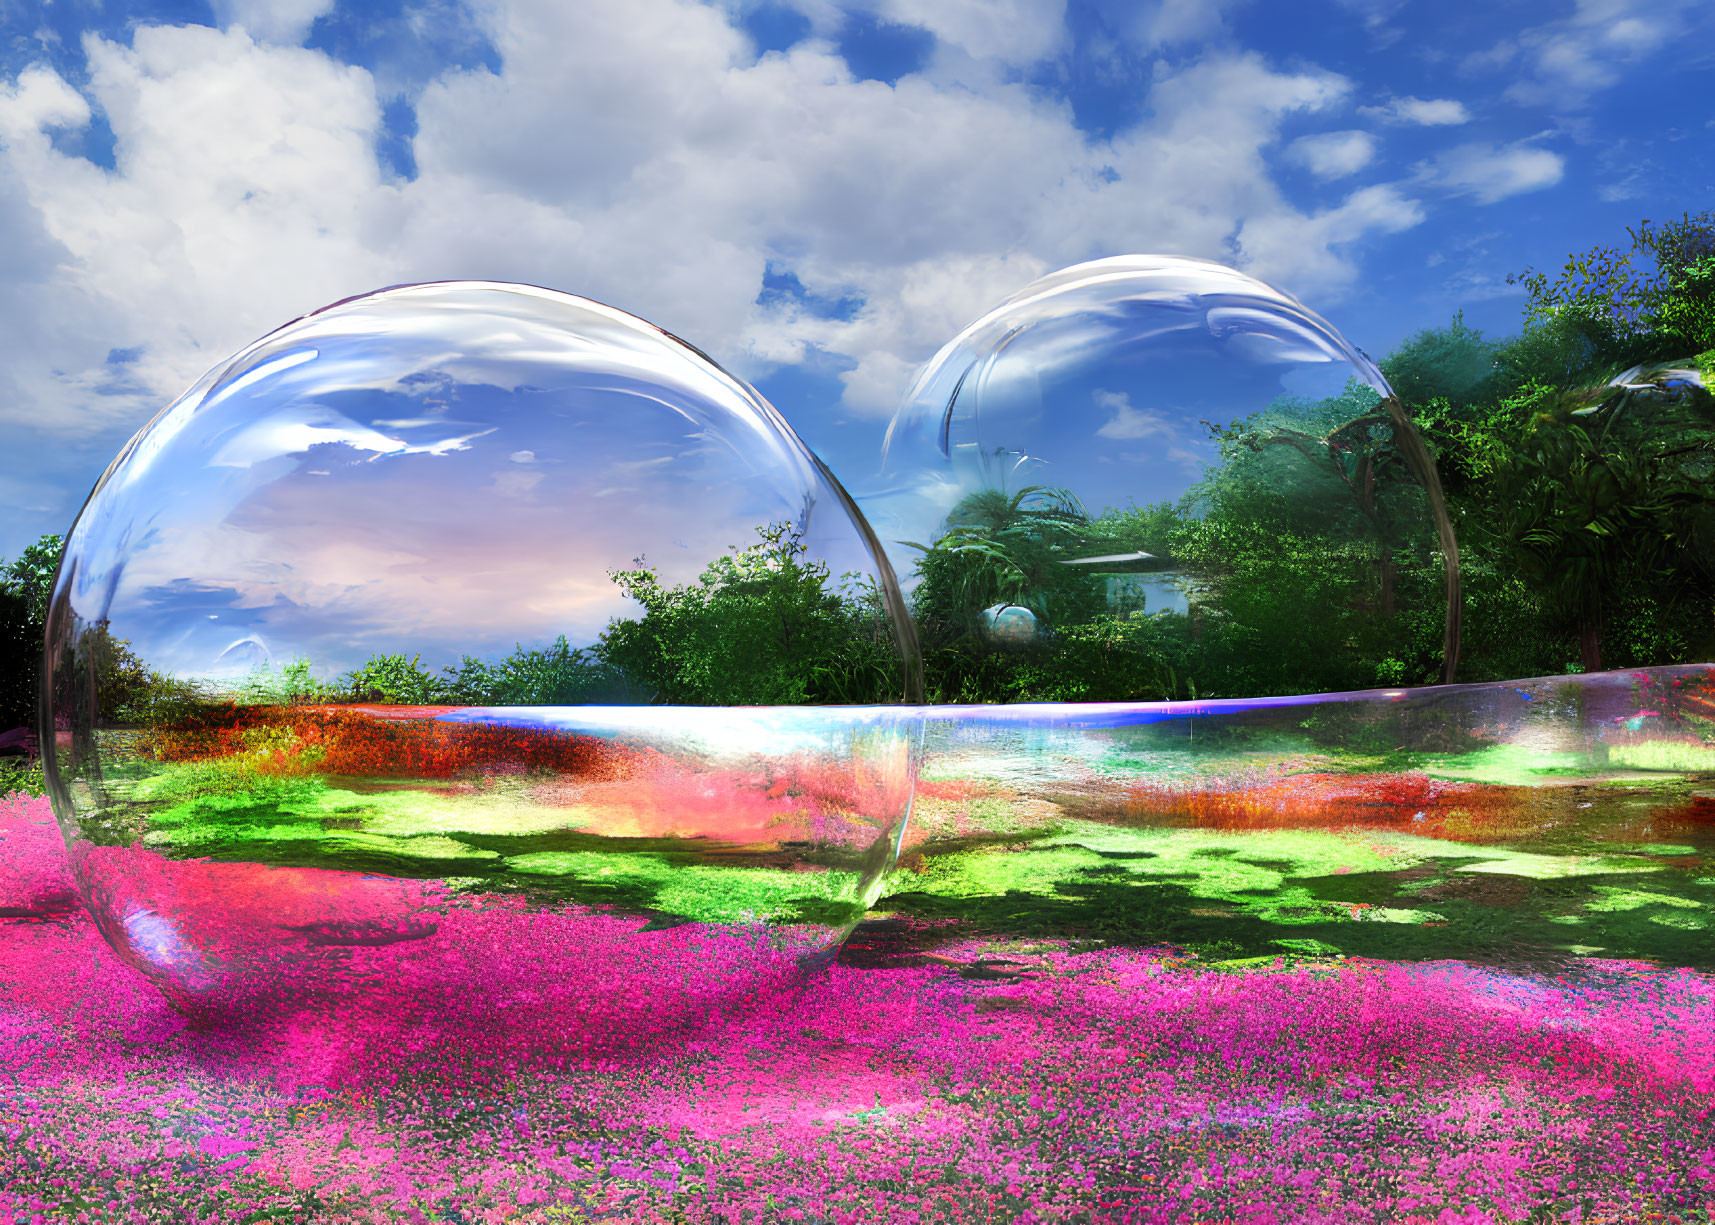 Transparent bubbles on vibrant pink flowerbed under blue sky with fluffy clouds.